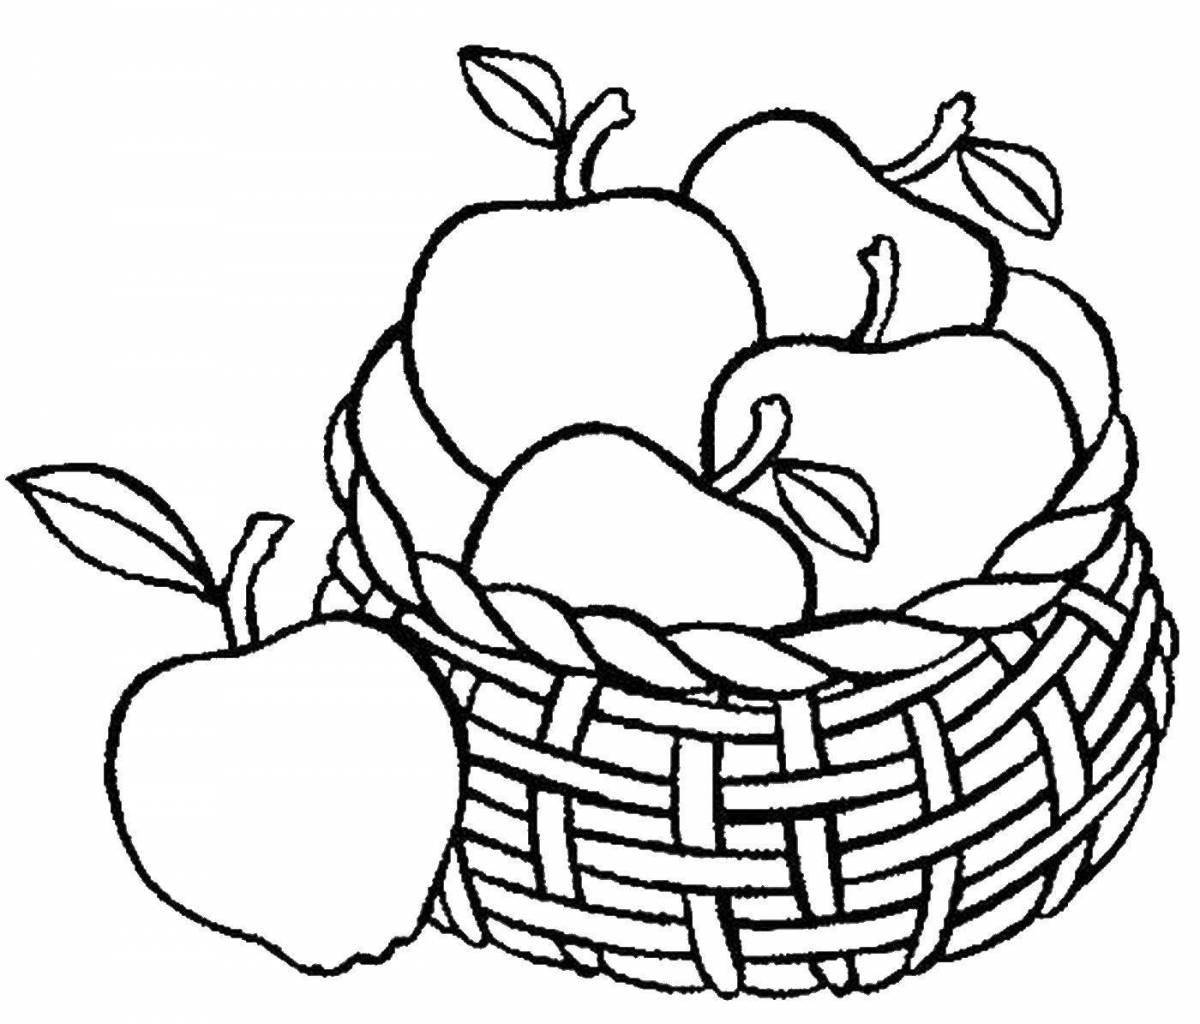 Colorful fruit and vegetable basket